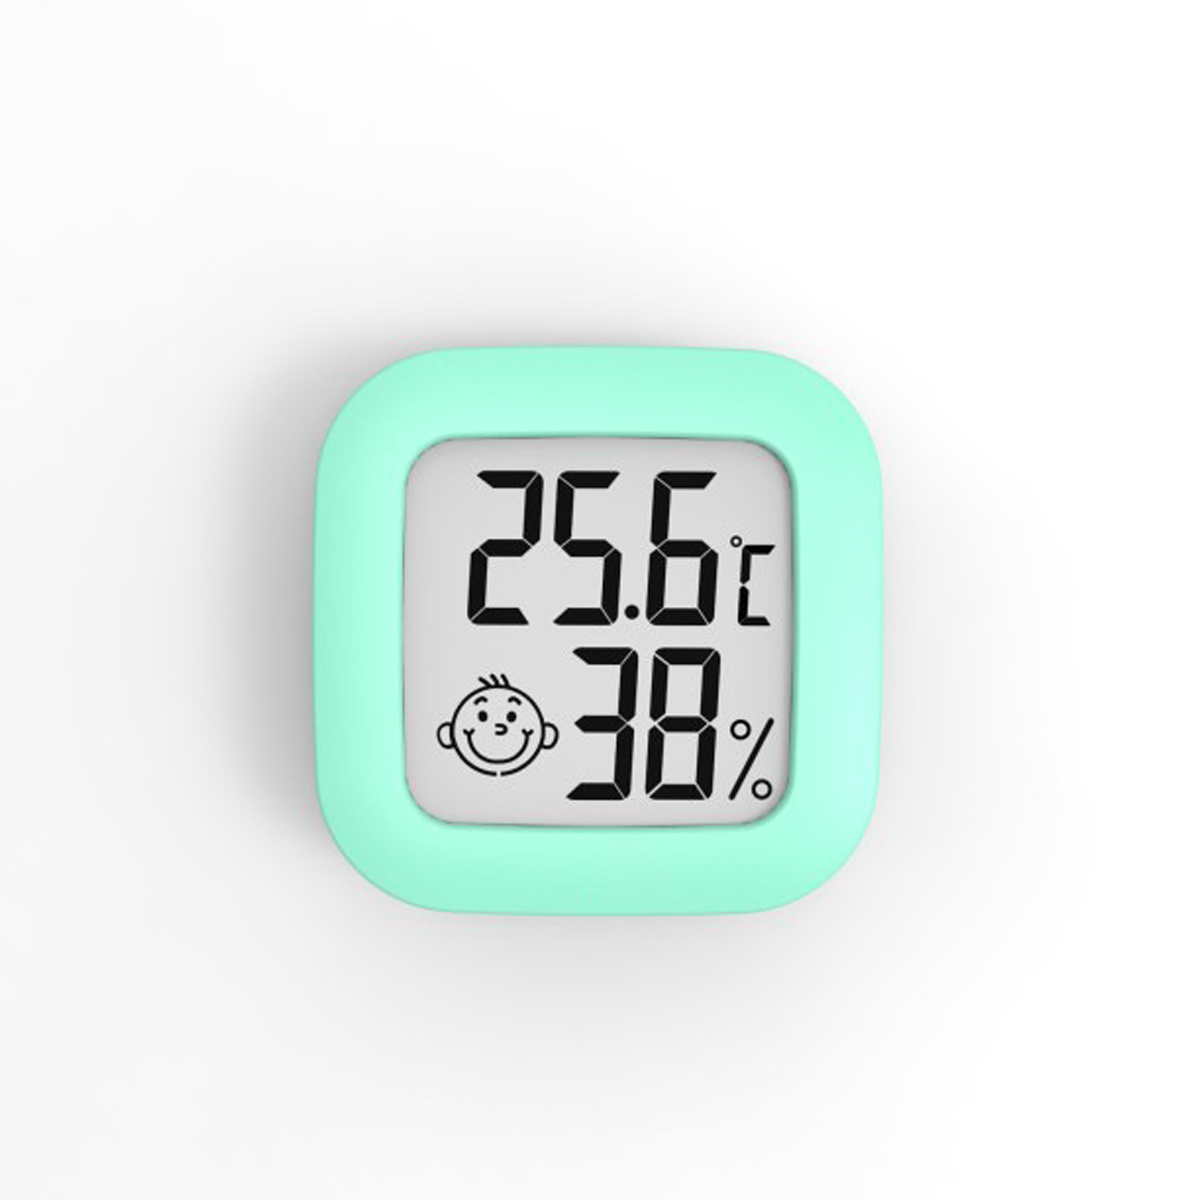 Smiley-Gesicht Hygrometer, Smart mit Hygrothermometer Connect JA BABY Thermometer, Mini